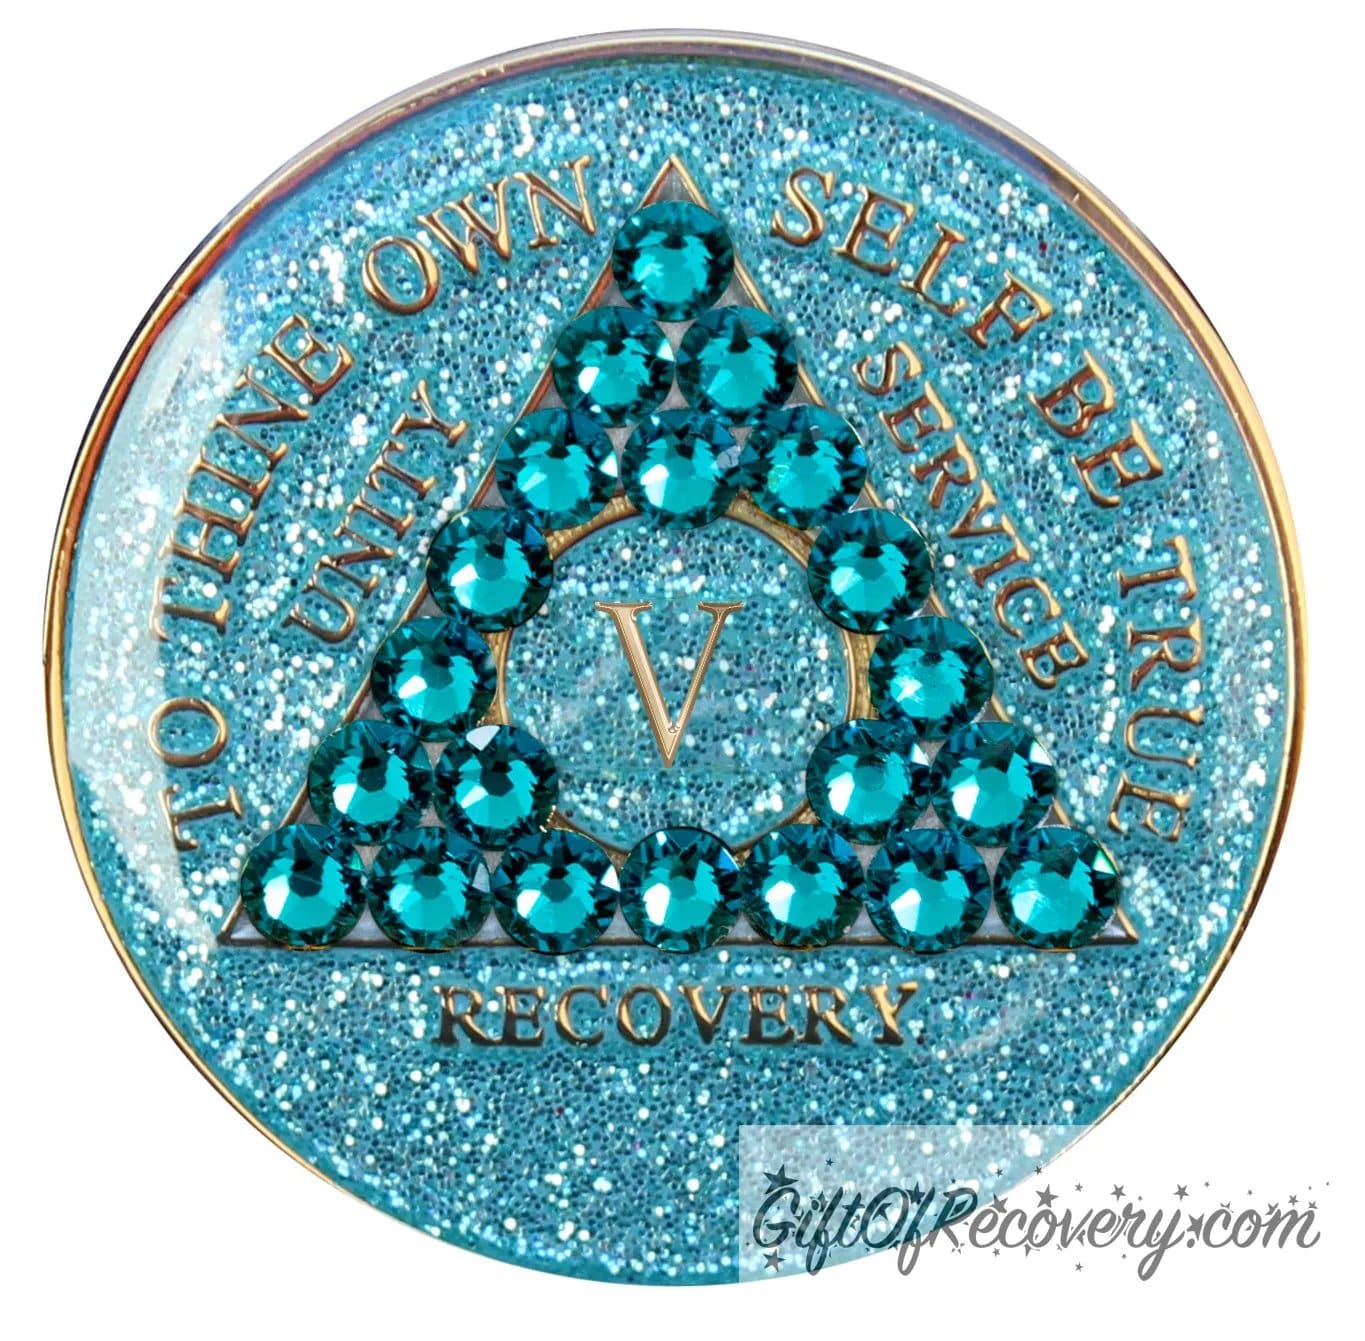 5 year AA medallion in aqua glitter with to thine own self be true, unity, service, recovery, the roman numeral in the center, and the outer rim of the medallion embossed in 14k gold plated brass, the center triangle has 21 genuine blue zircon crystal to give it a sparkle, it is sealed with resin for a shiny finish.